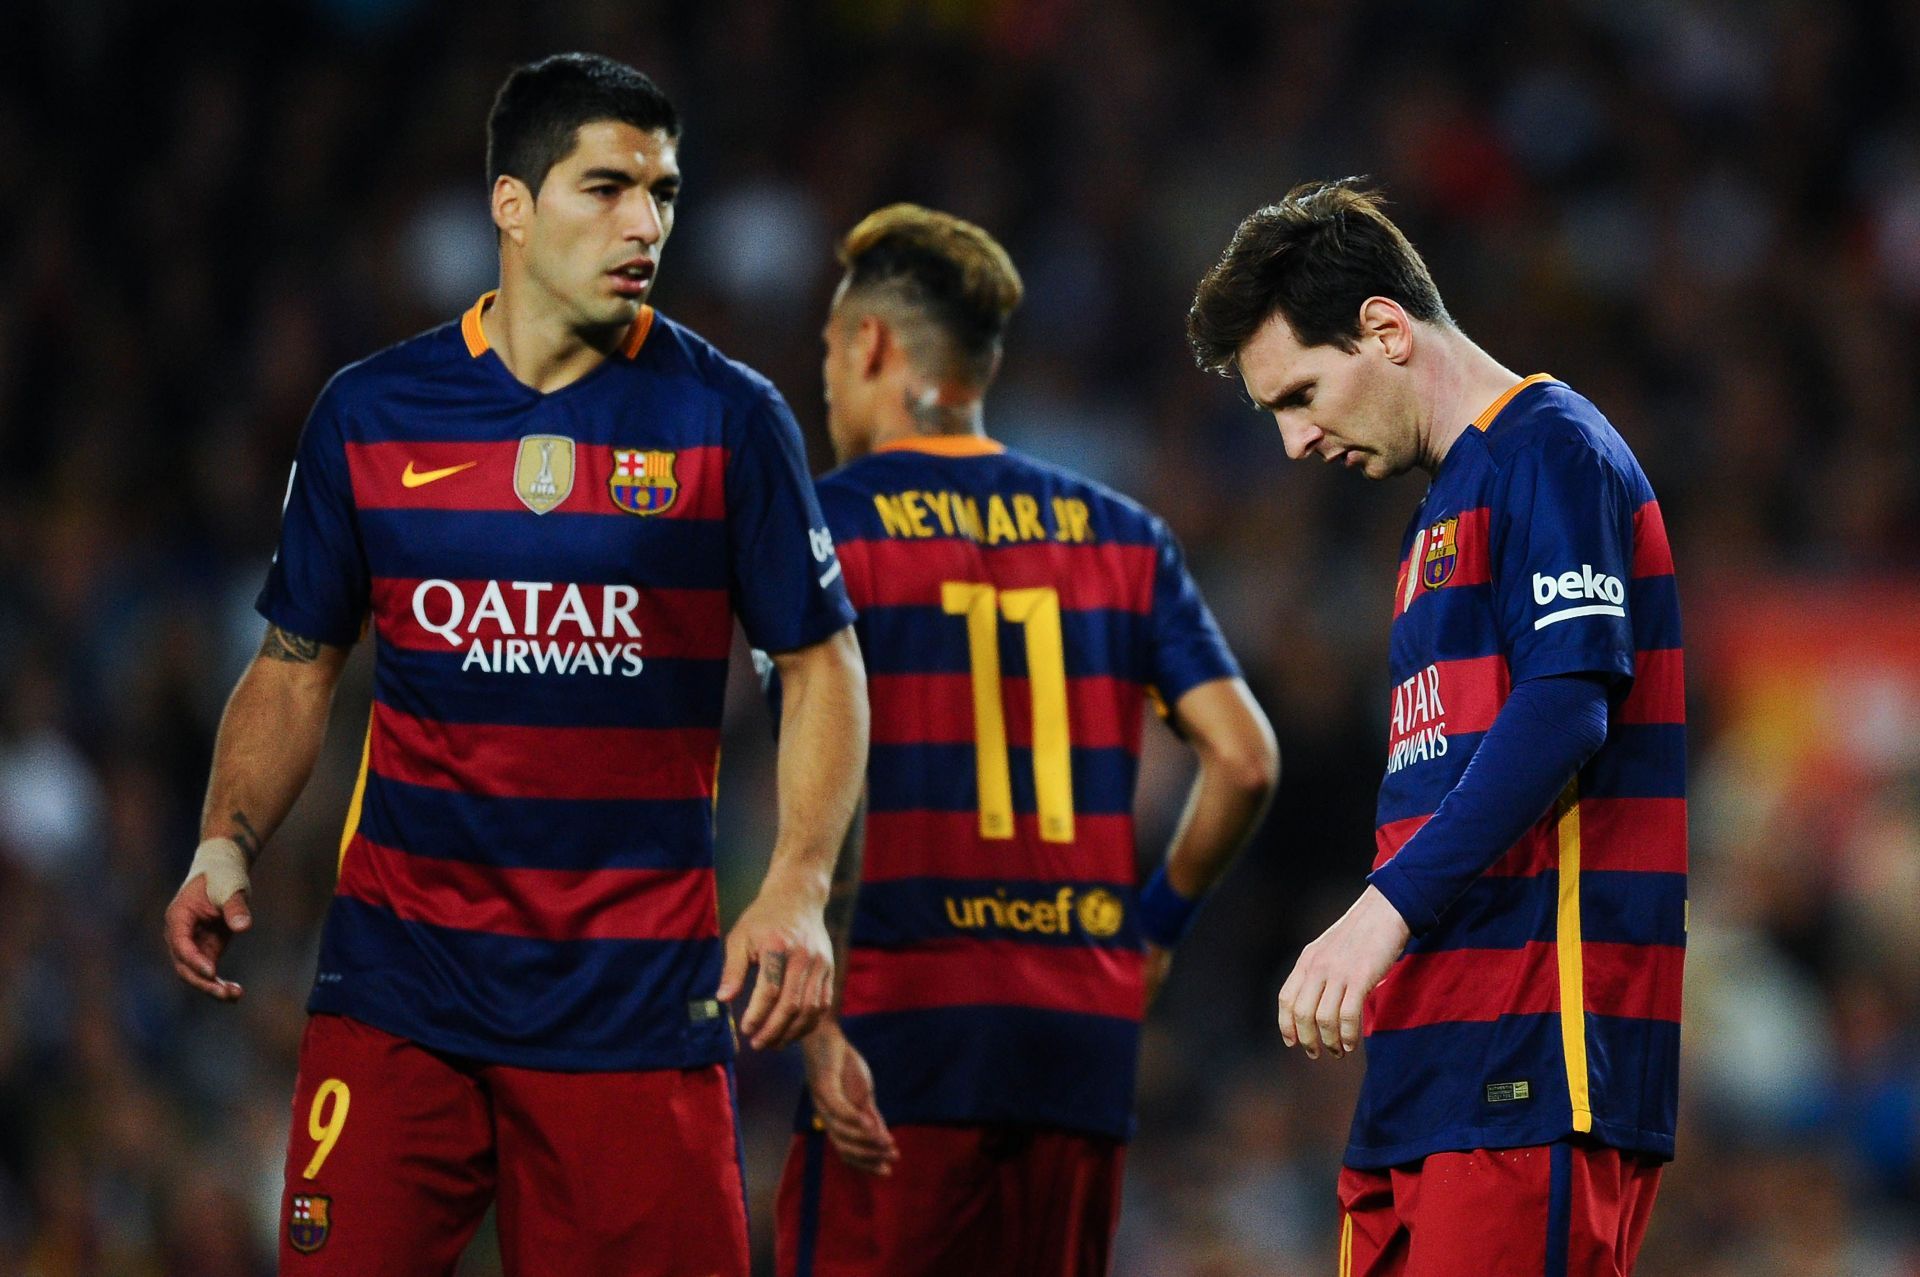 Luis Suarez, Neymar and Lionel Messi (from left to right)